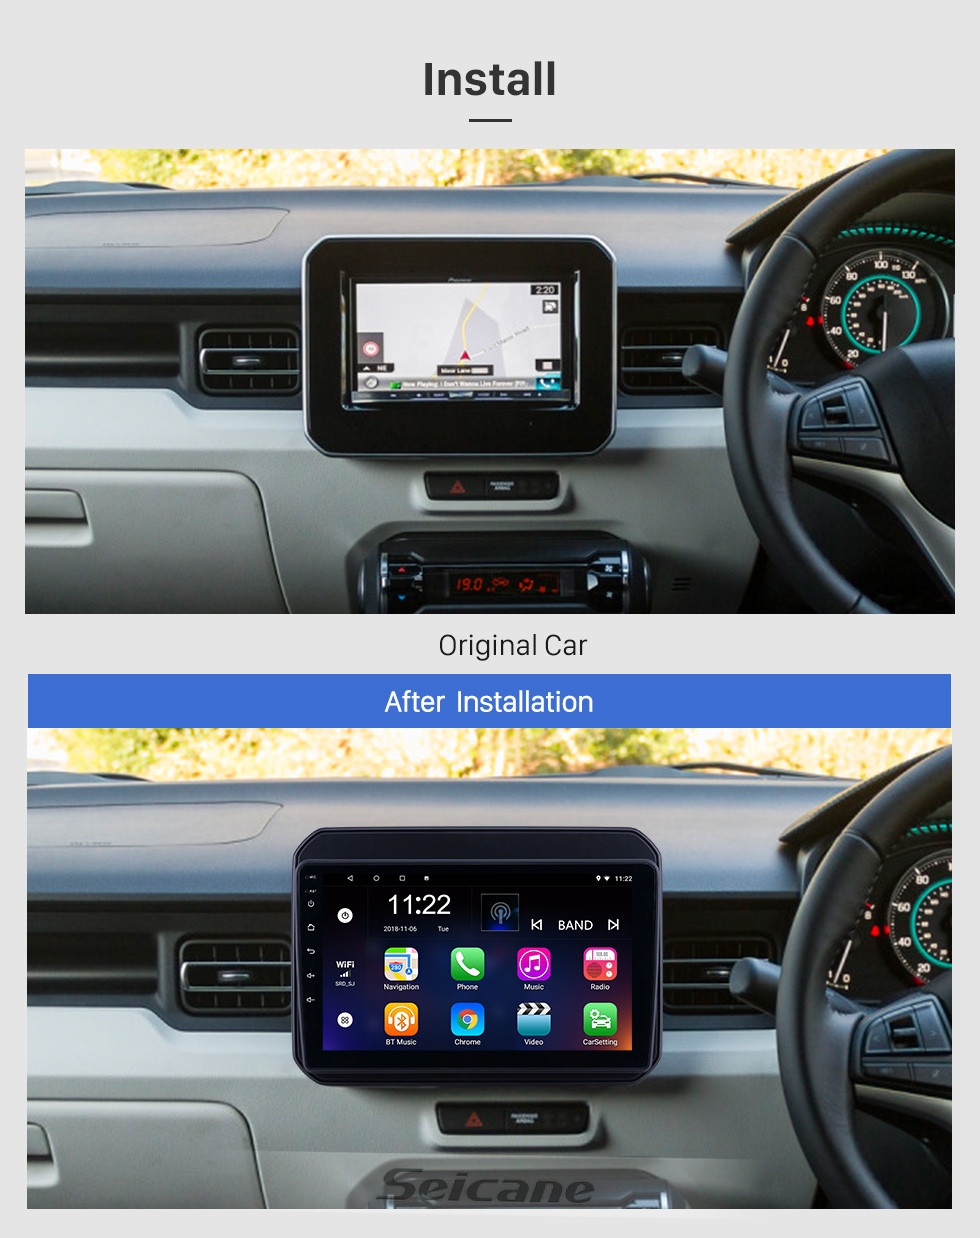 Seicane HD Touchscreen 9 inch Android 10.0 GPS Navigation Radio for 2016-2018 Suzuki IGNIS with Bluetooth USB WIFI AUX support Carplay 3G Backup camera TPMS